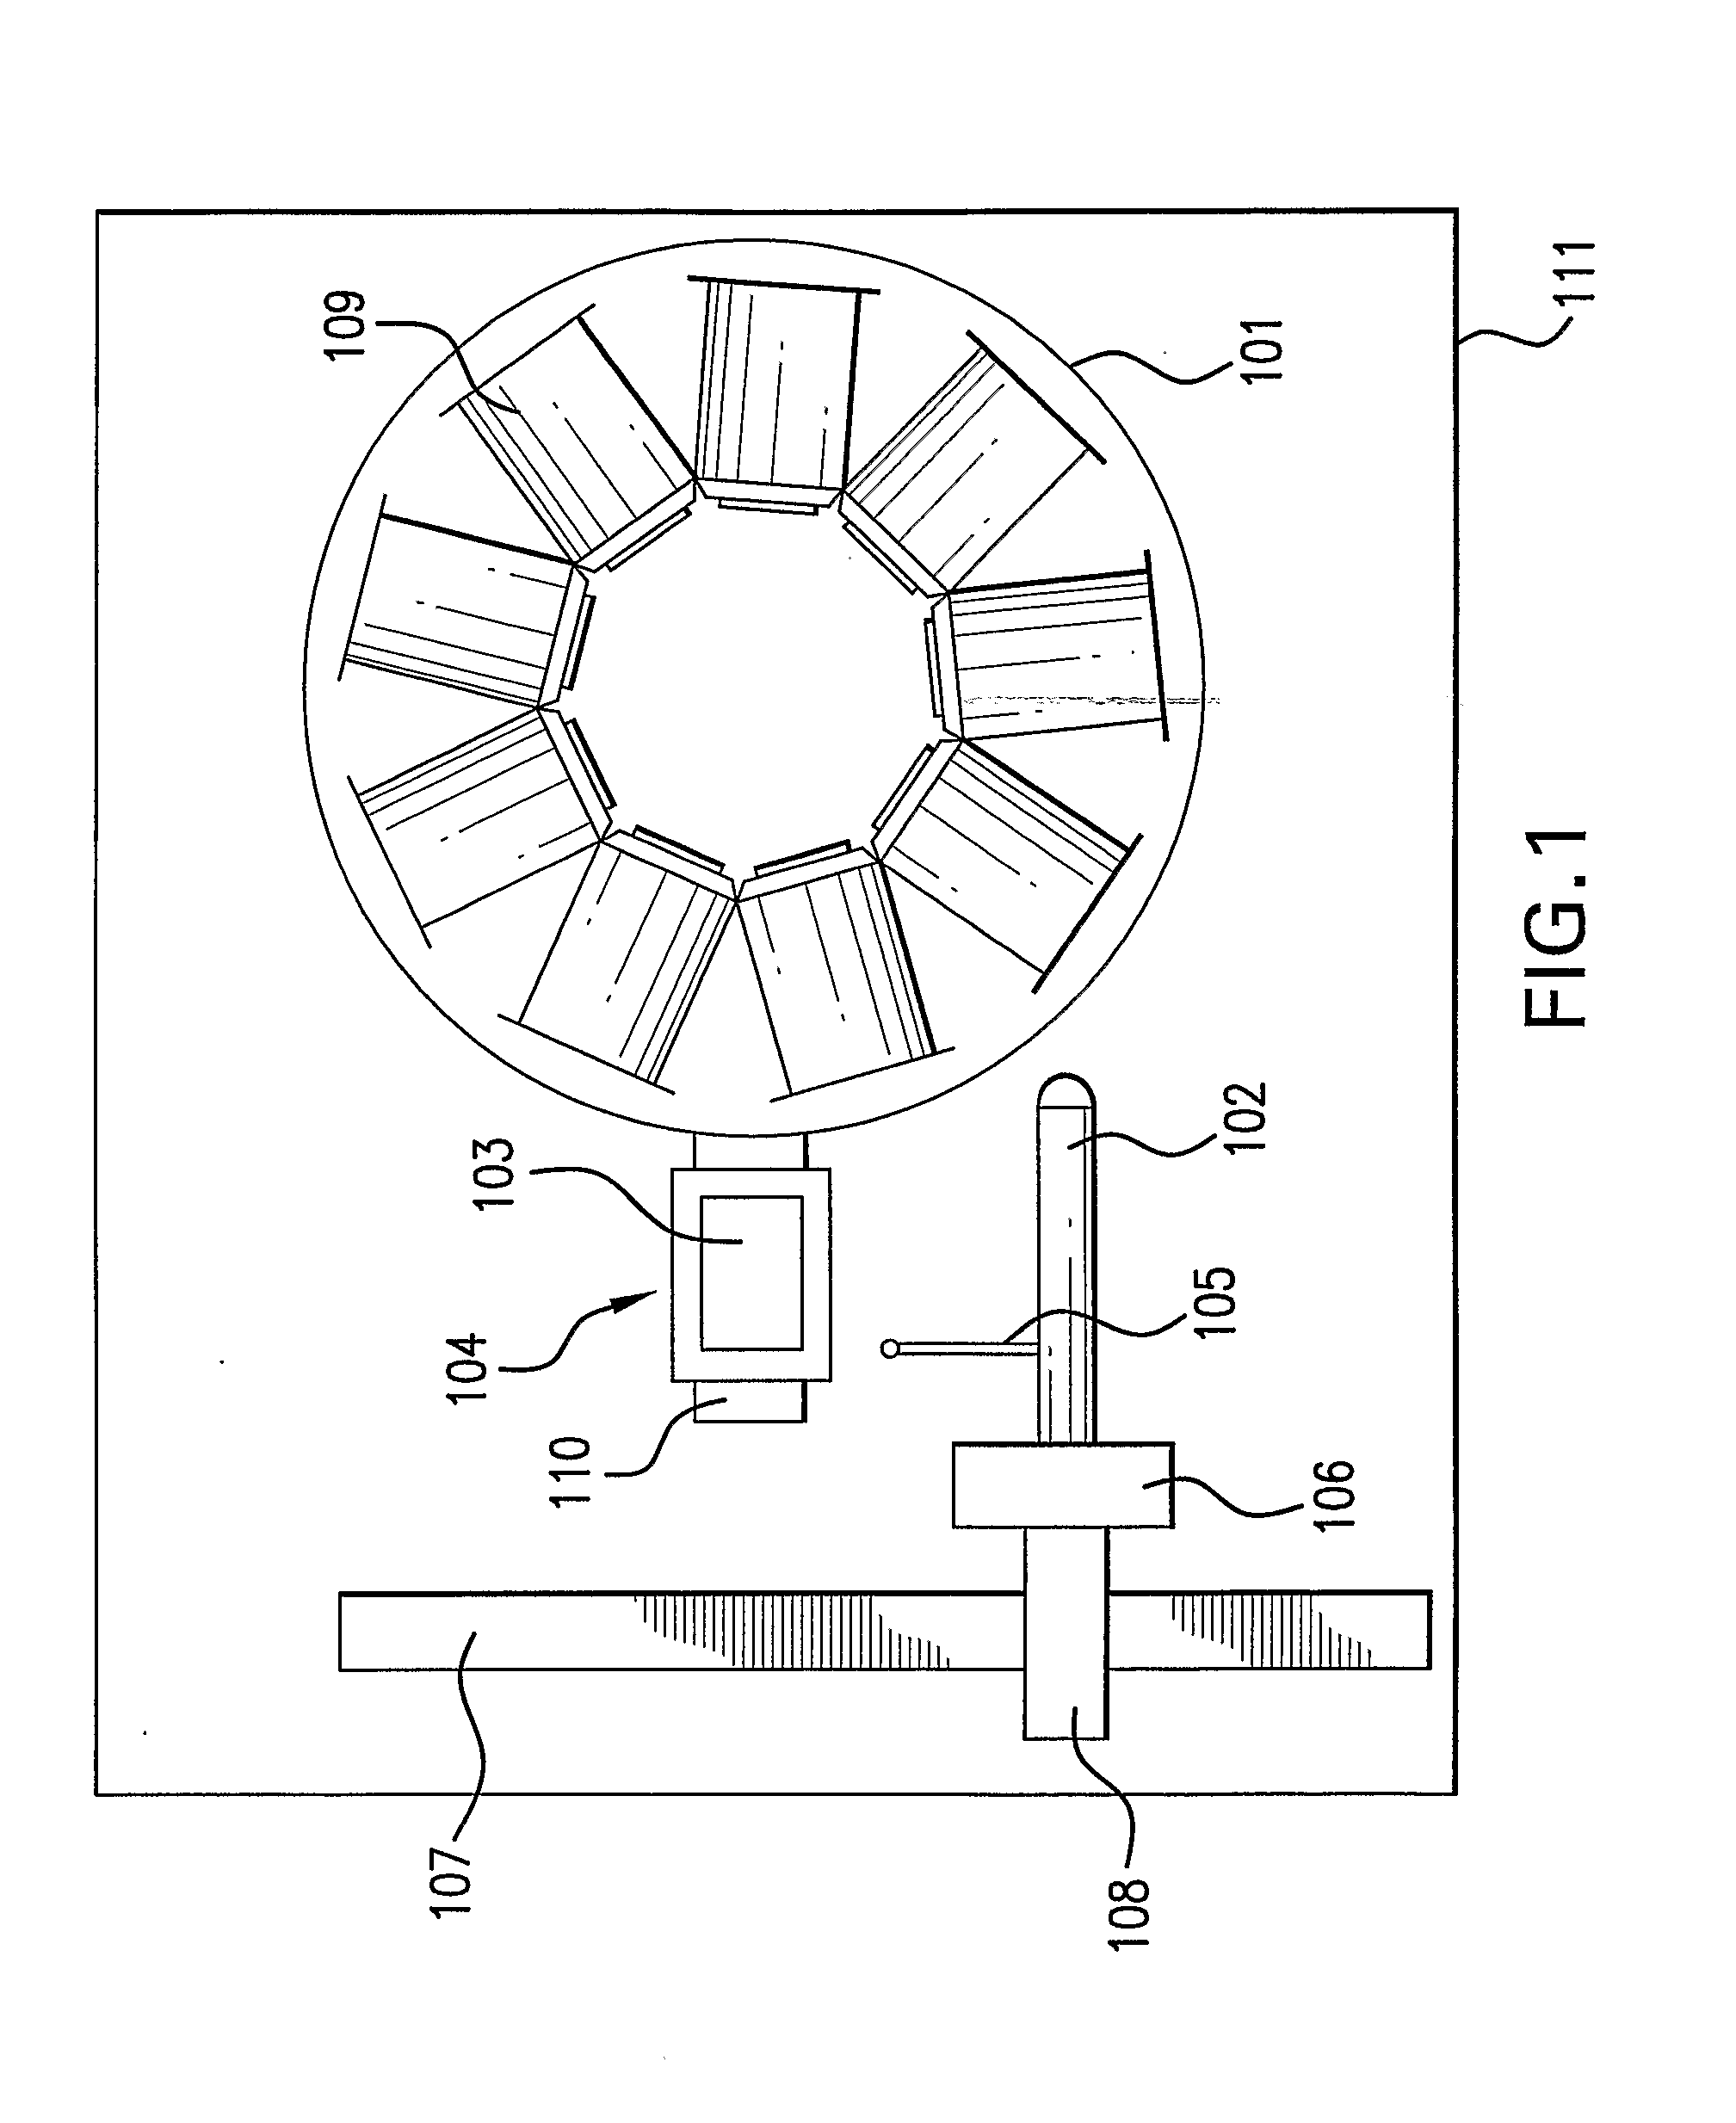 Method and Apparatus for Automatically Isolating Microbial Species